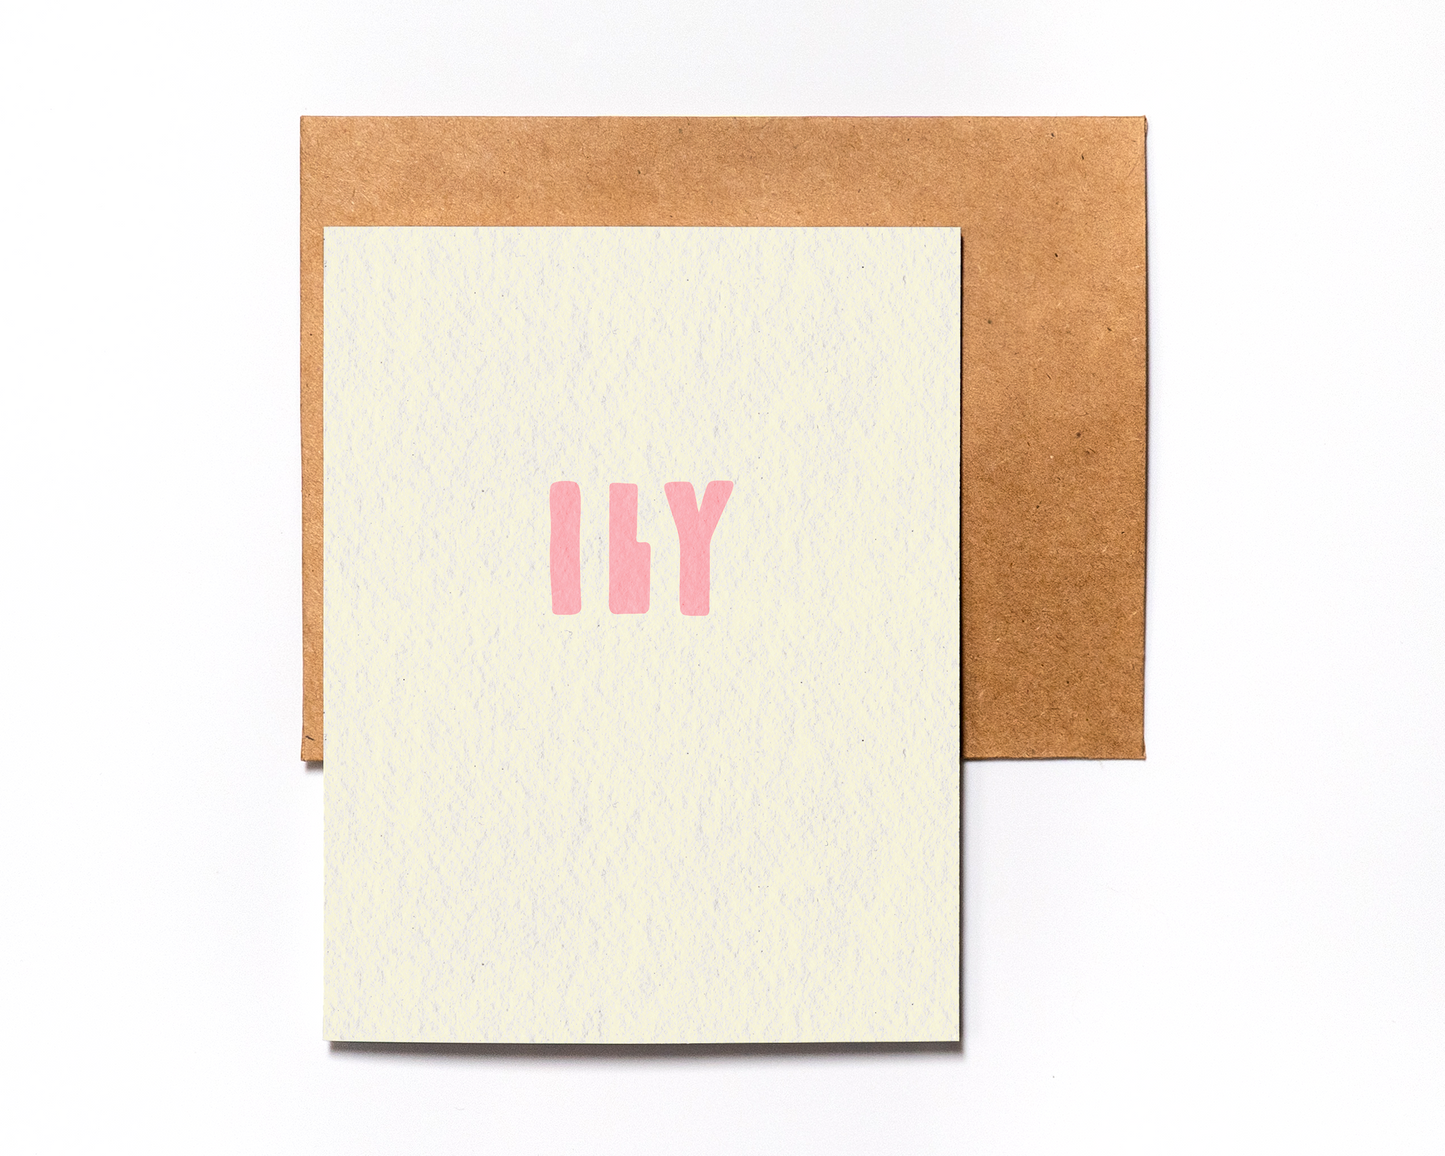 ILY - I Love You Greeting Card - Love Card - Gifts For Him - Gifts For Her - For Husband - For Wife - Anniversary Card - Blank Inside